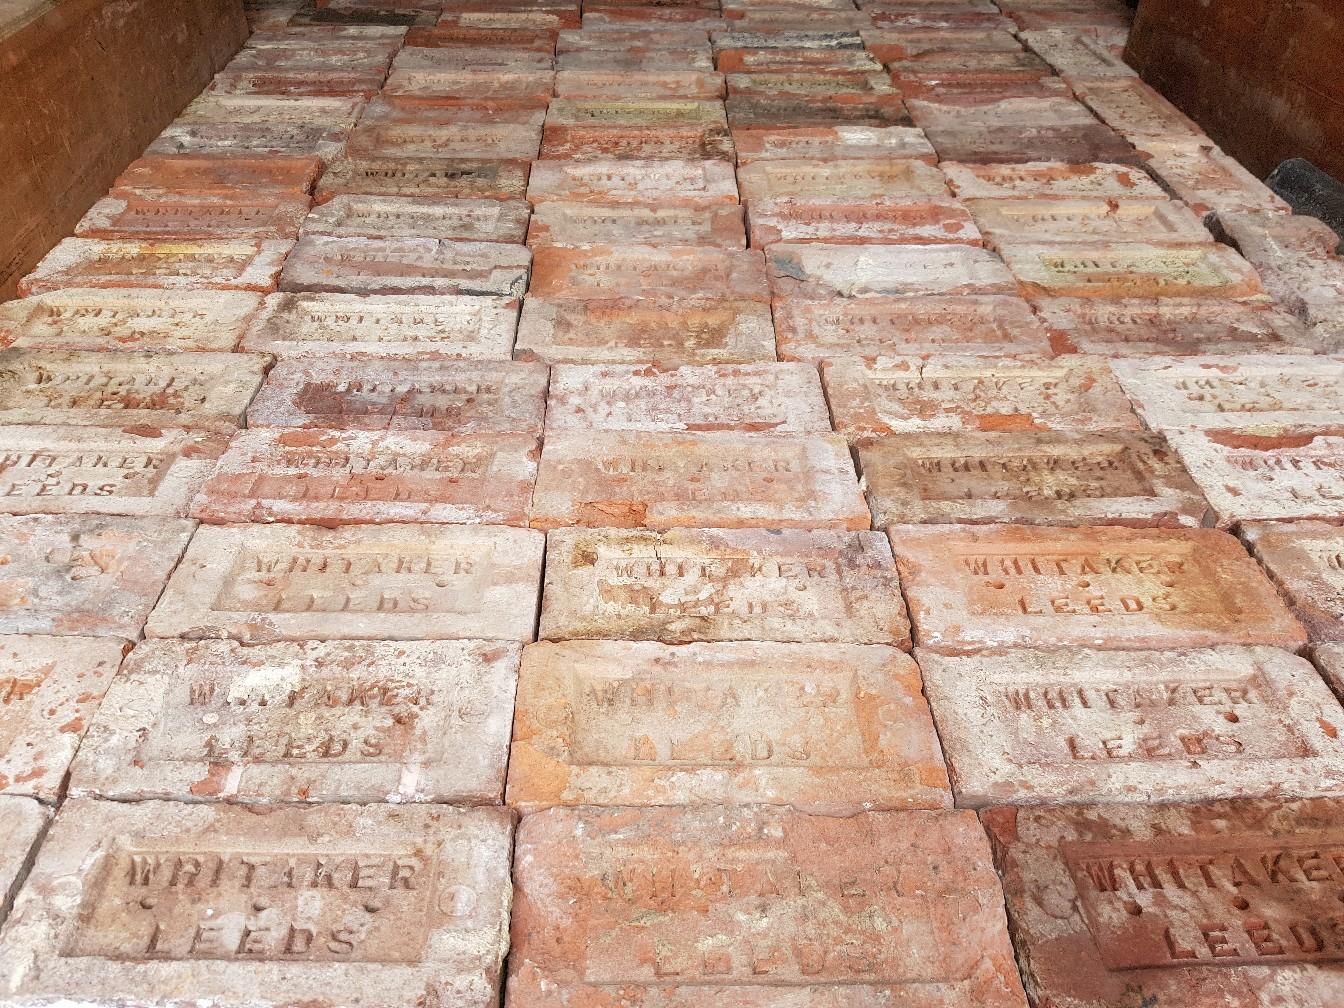 100 Reclaimed Whitaker Bricks All Only £20 In Ls12 Leeds For £2000 For 